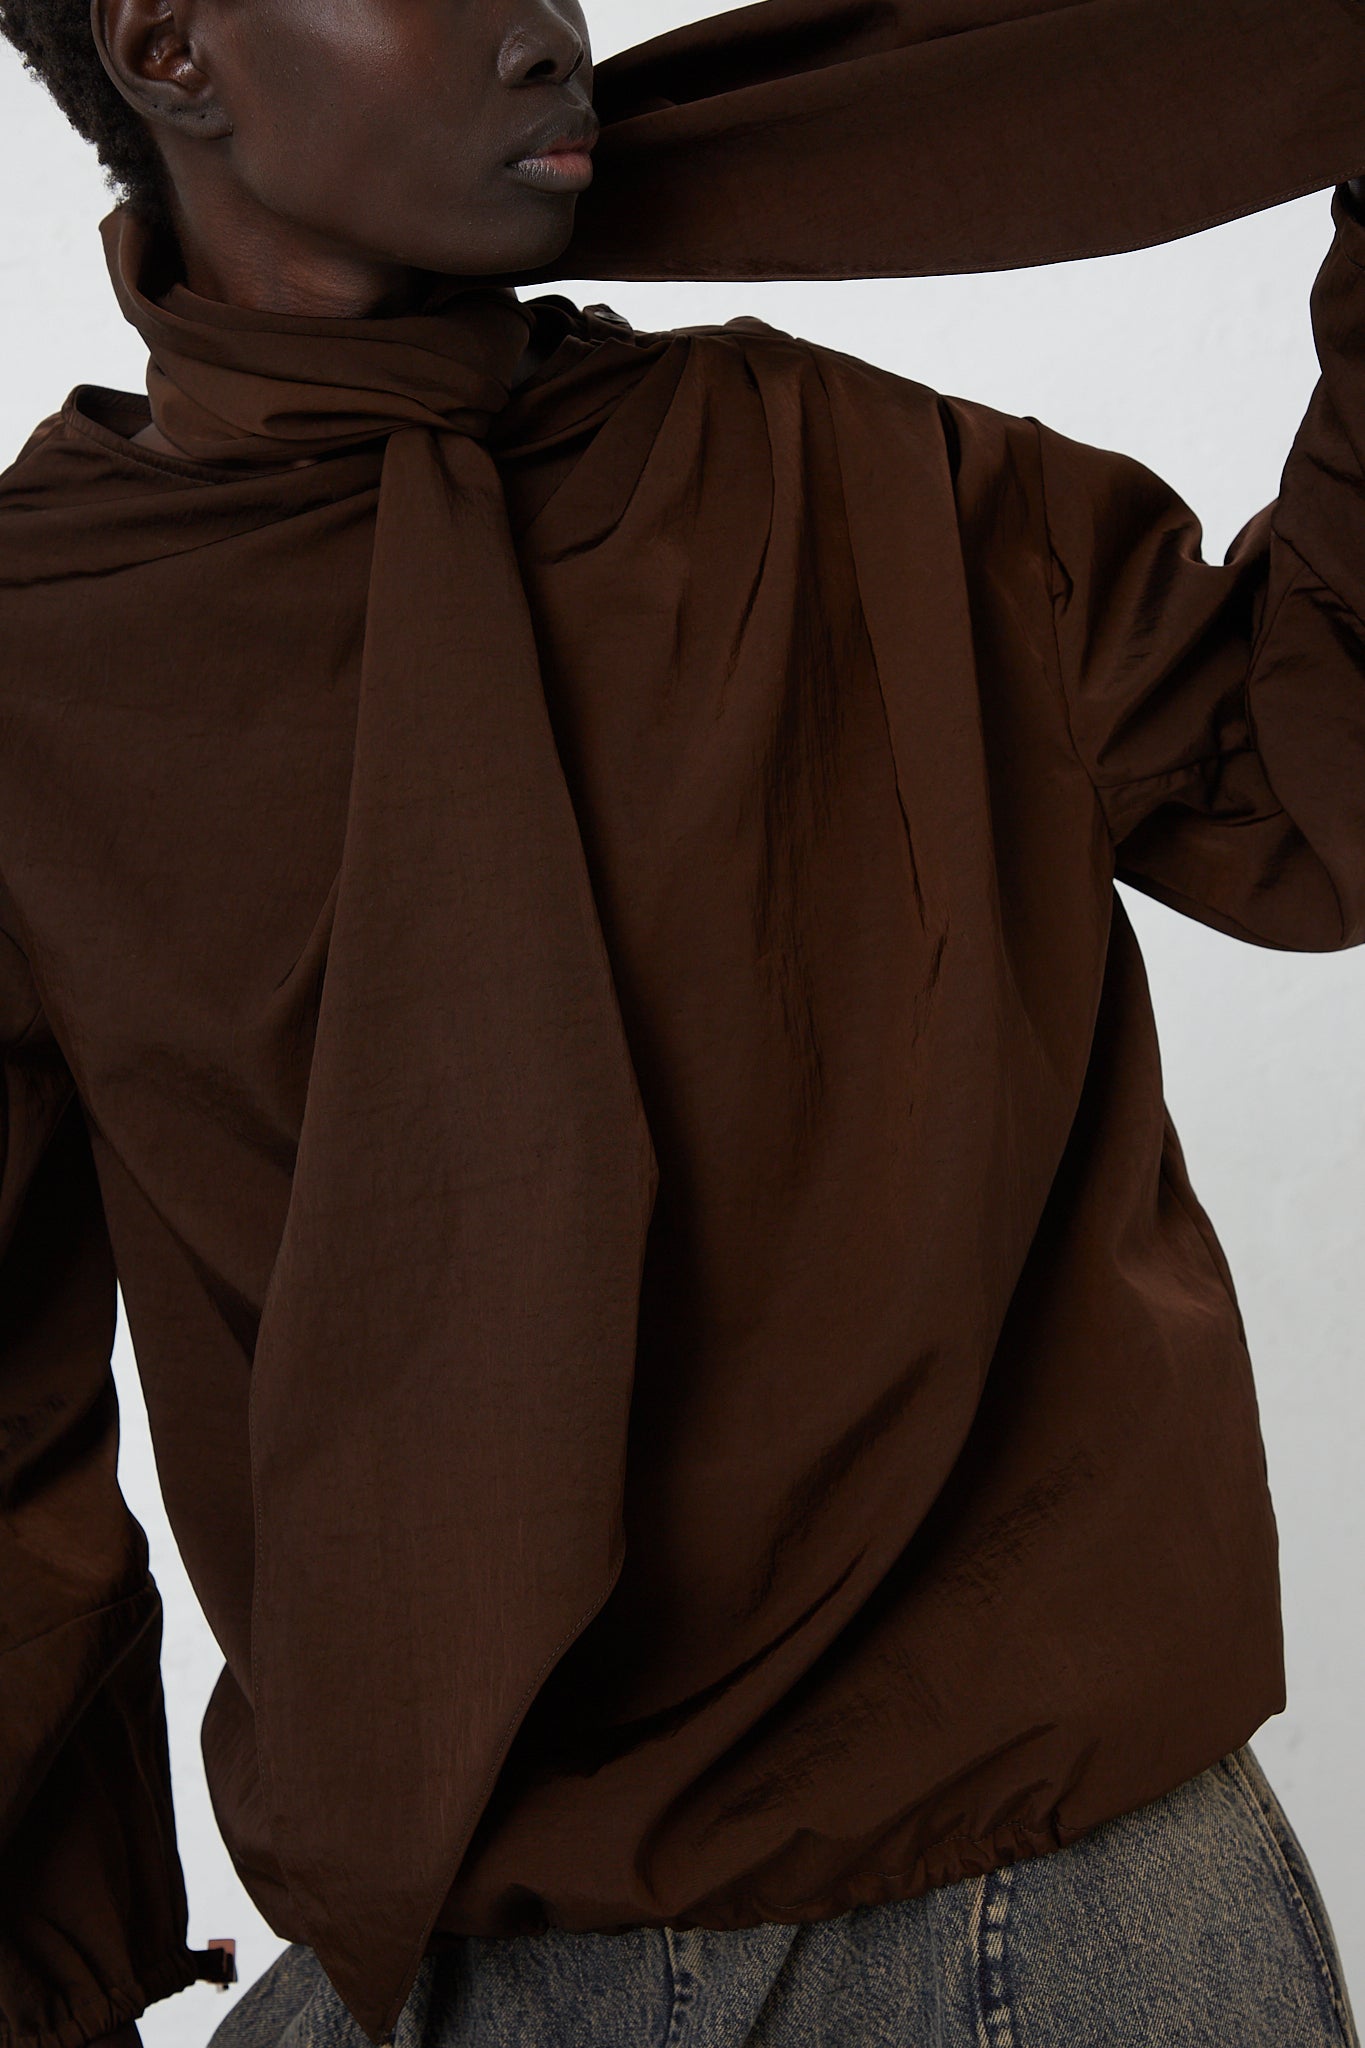 A woman is posing in a Veronique Leroy Zipped on Sleeve Rain Blouse in Choco.